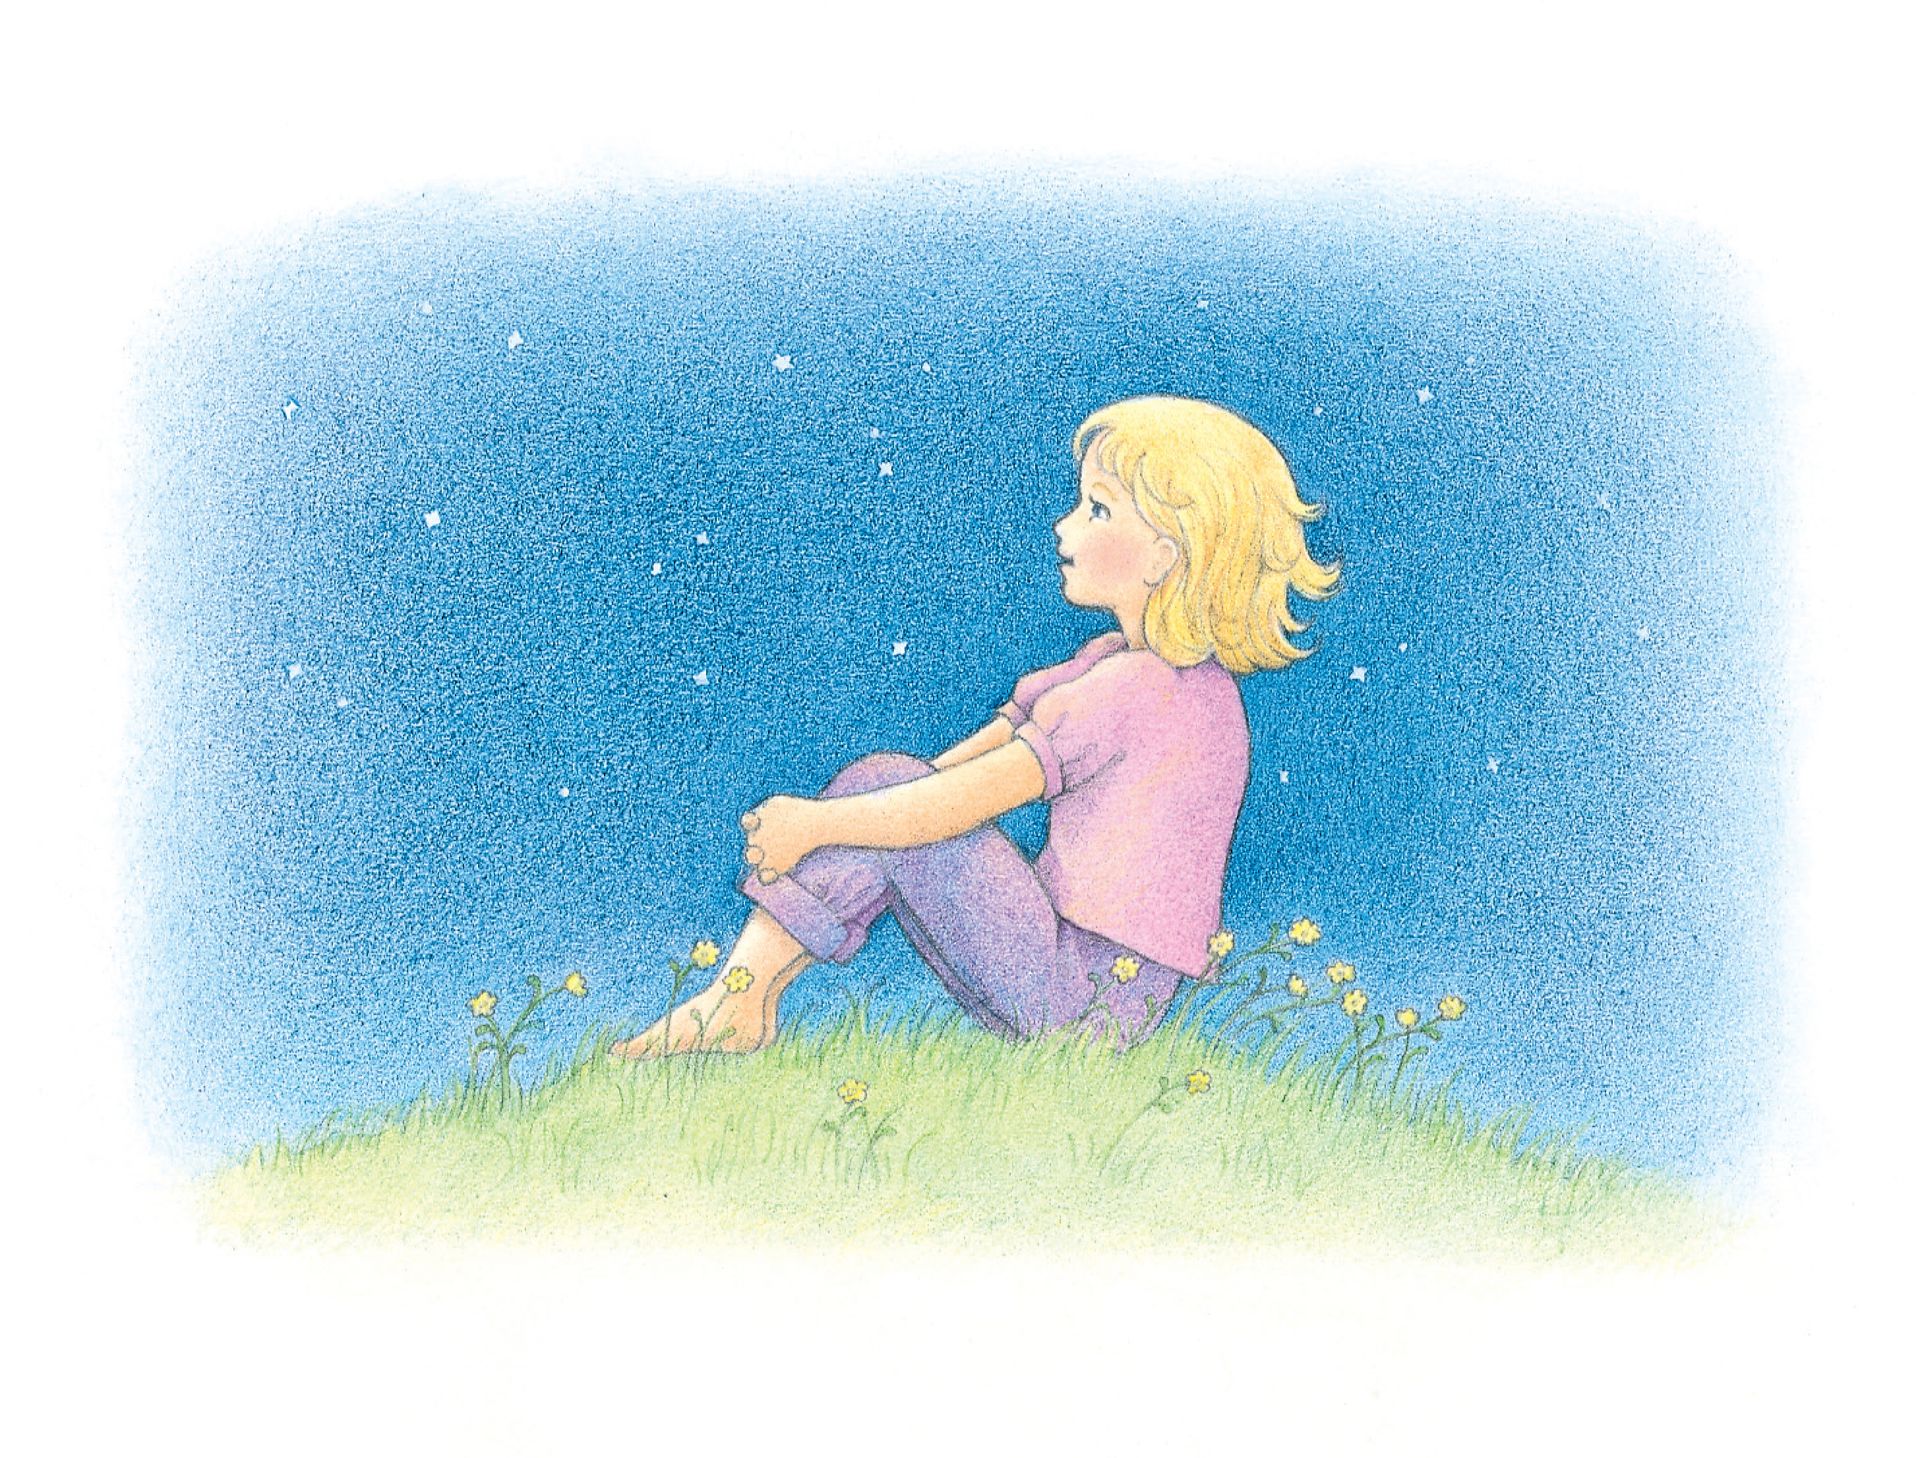 A girl sitting on a hill, looking up at the stars. From the Children’s Songbook, page 163, “I Am like a Star”; watercolor illustration by Beth Whittaker.